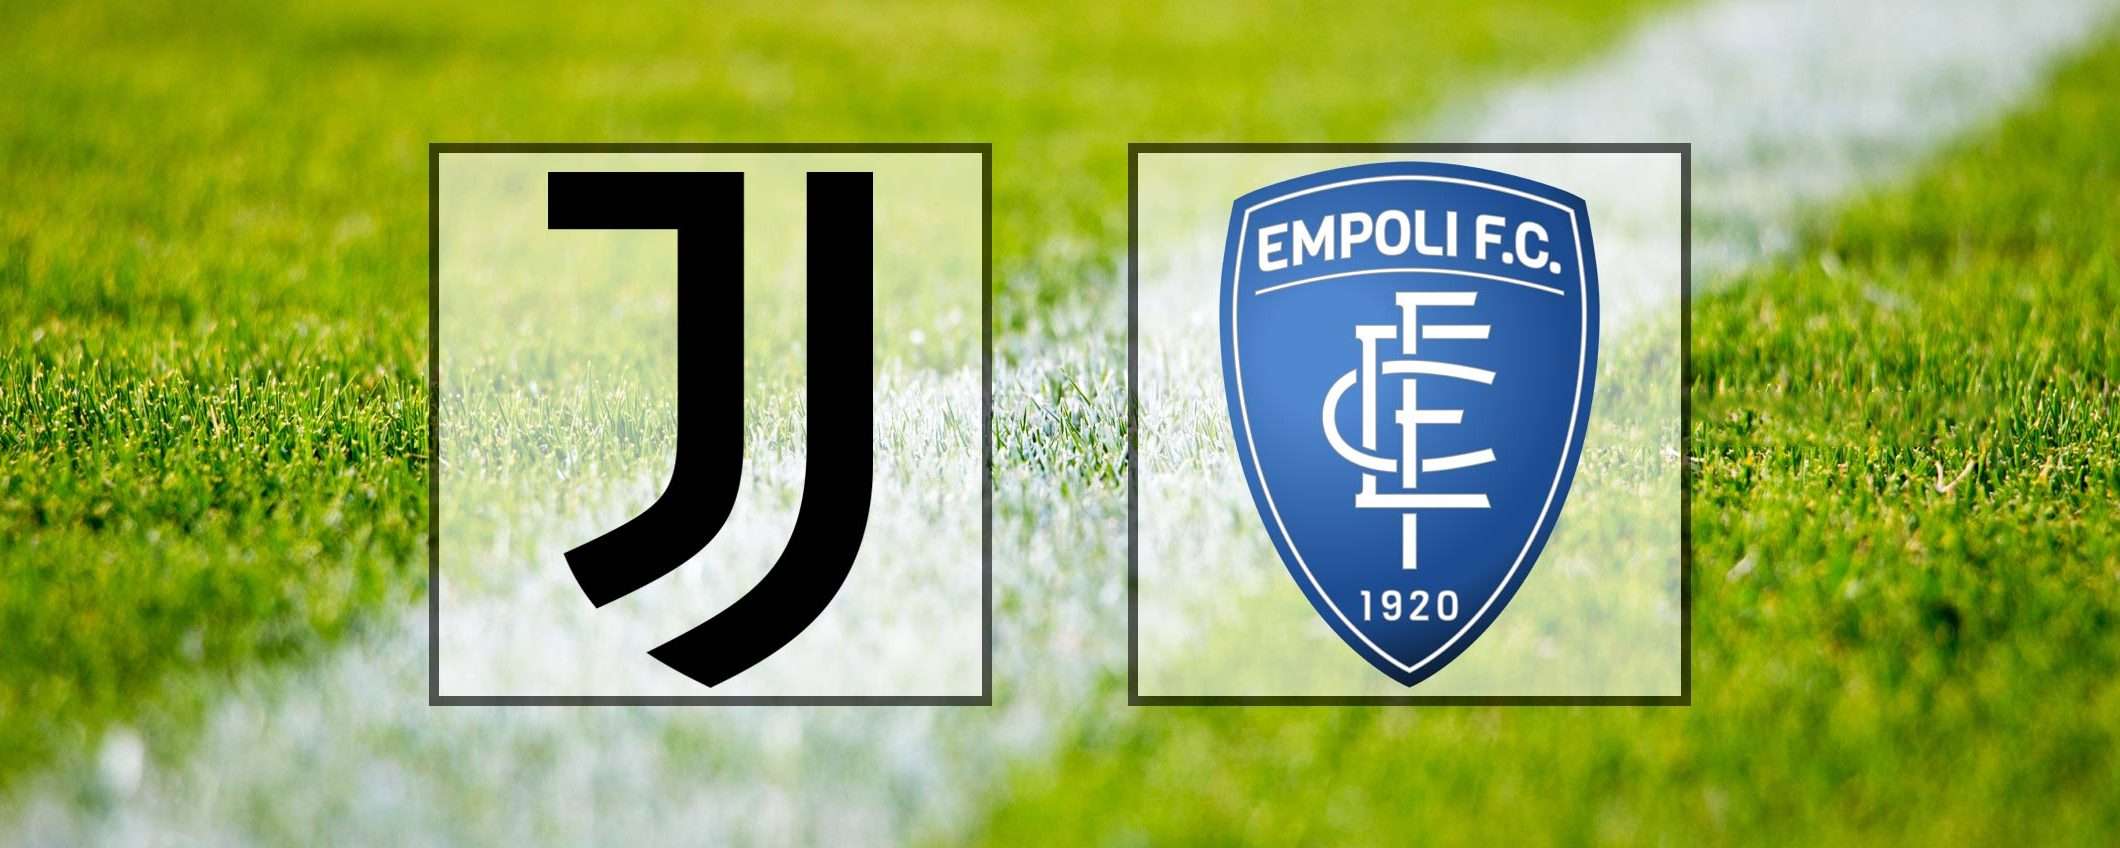 Come vedere Juventus-Empoli in streaming (Serie A)